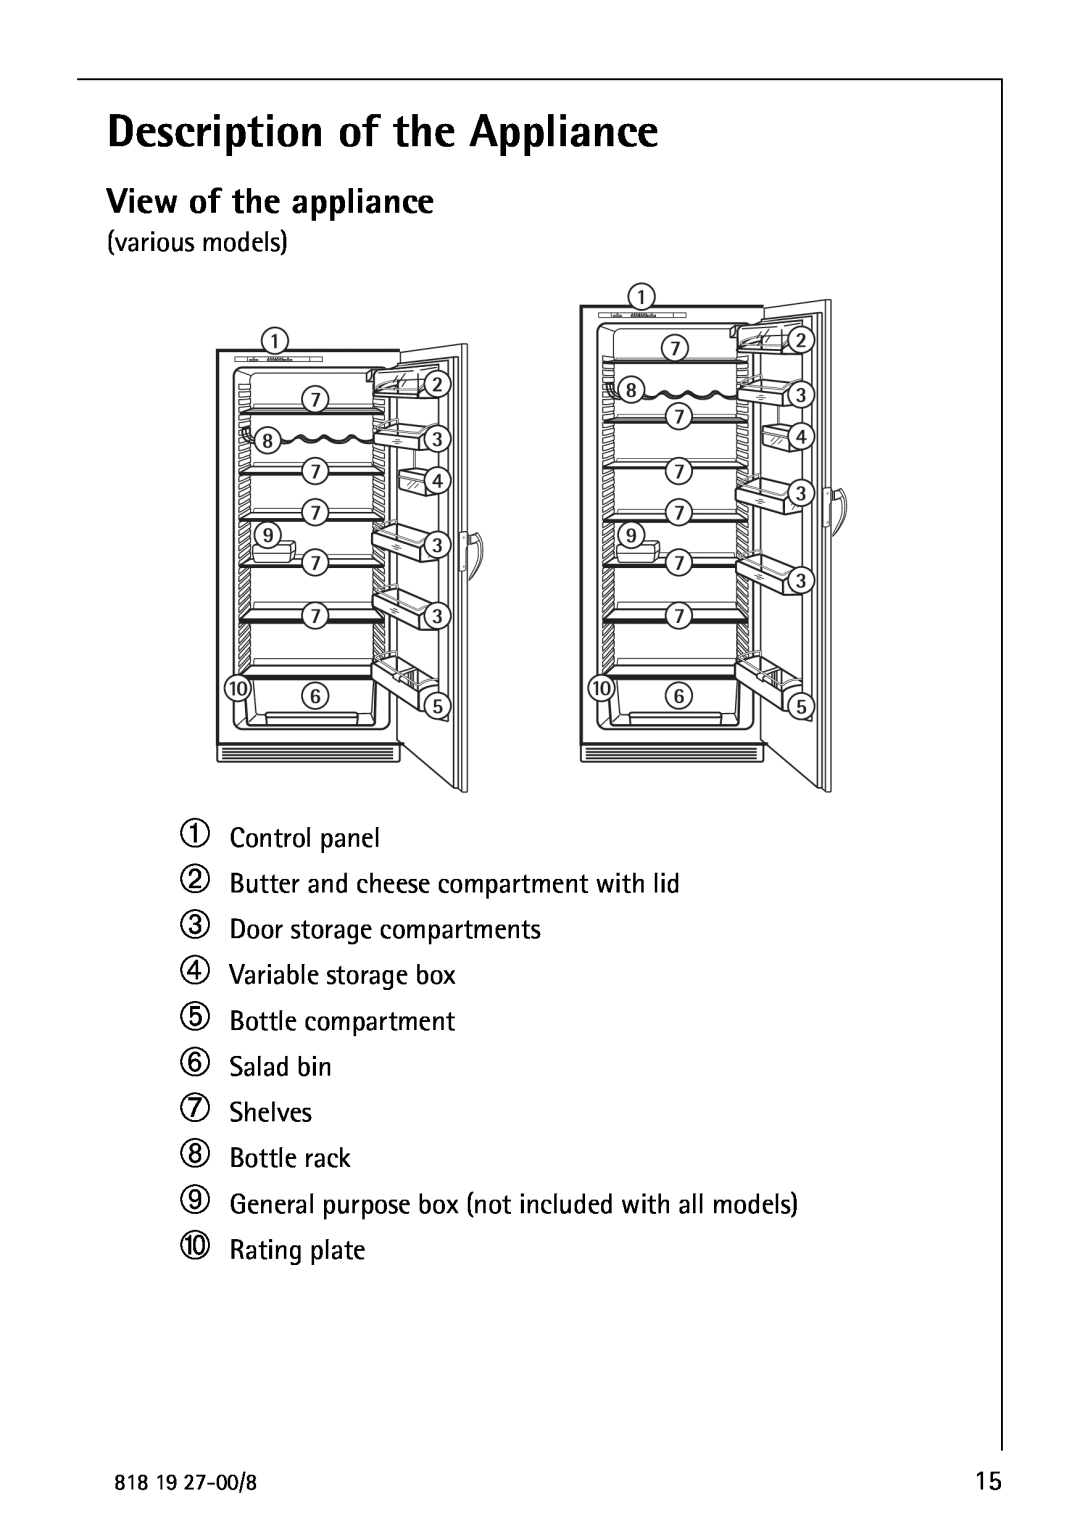 Electrolux Upright Refrigerator manual Description of the Appliance, View of the appliance 